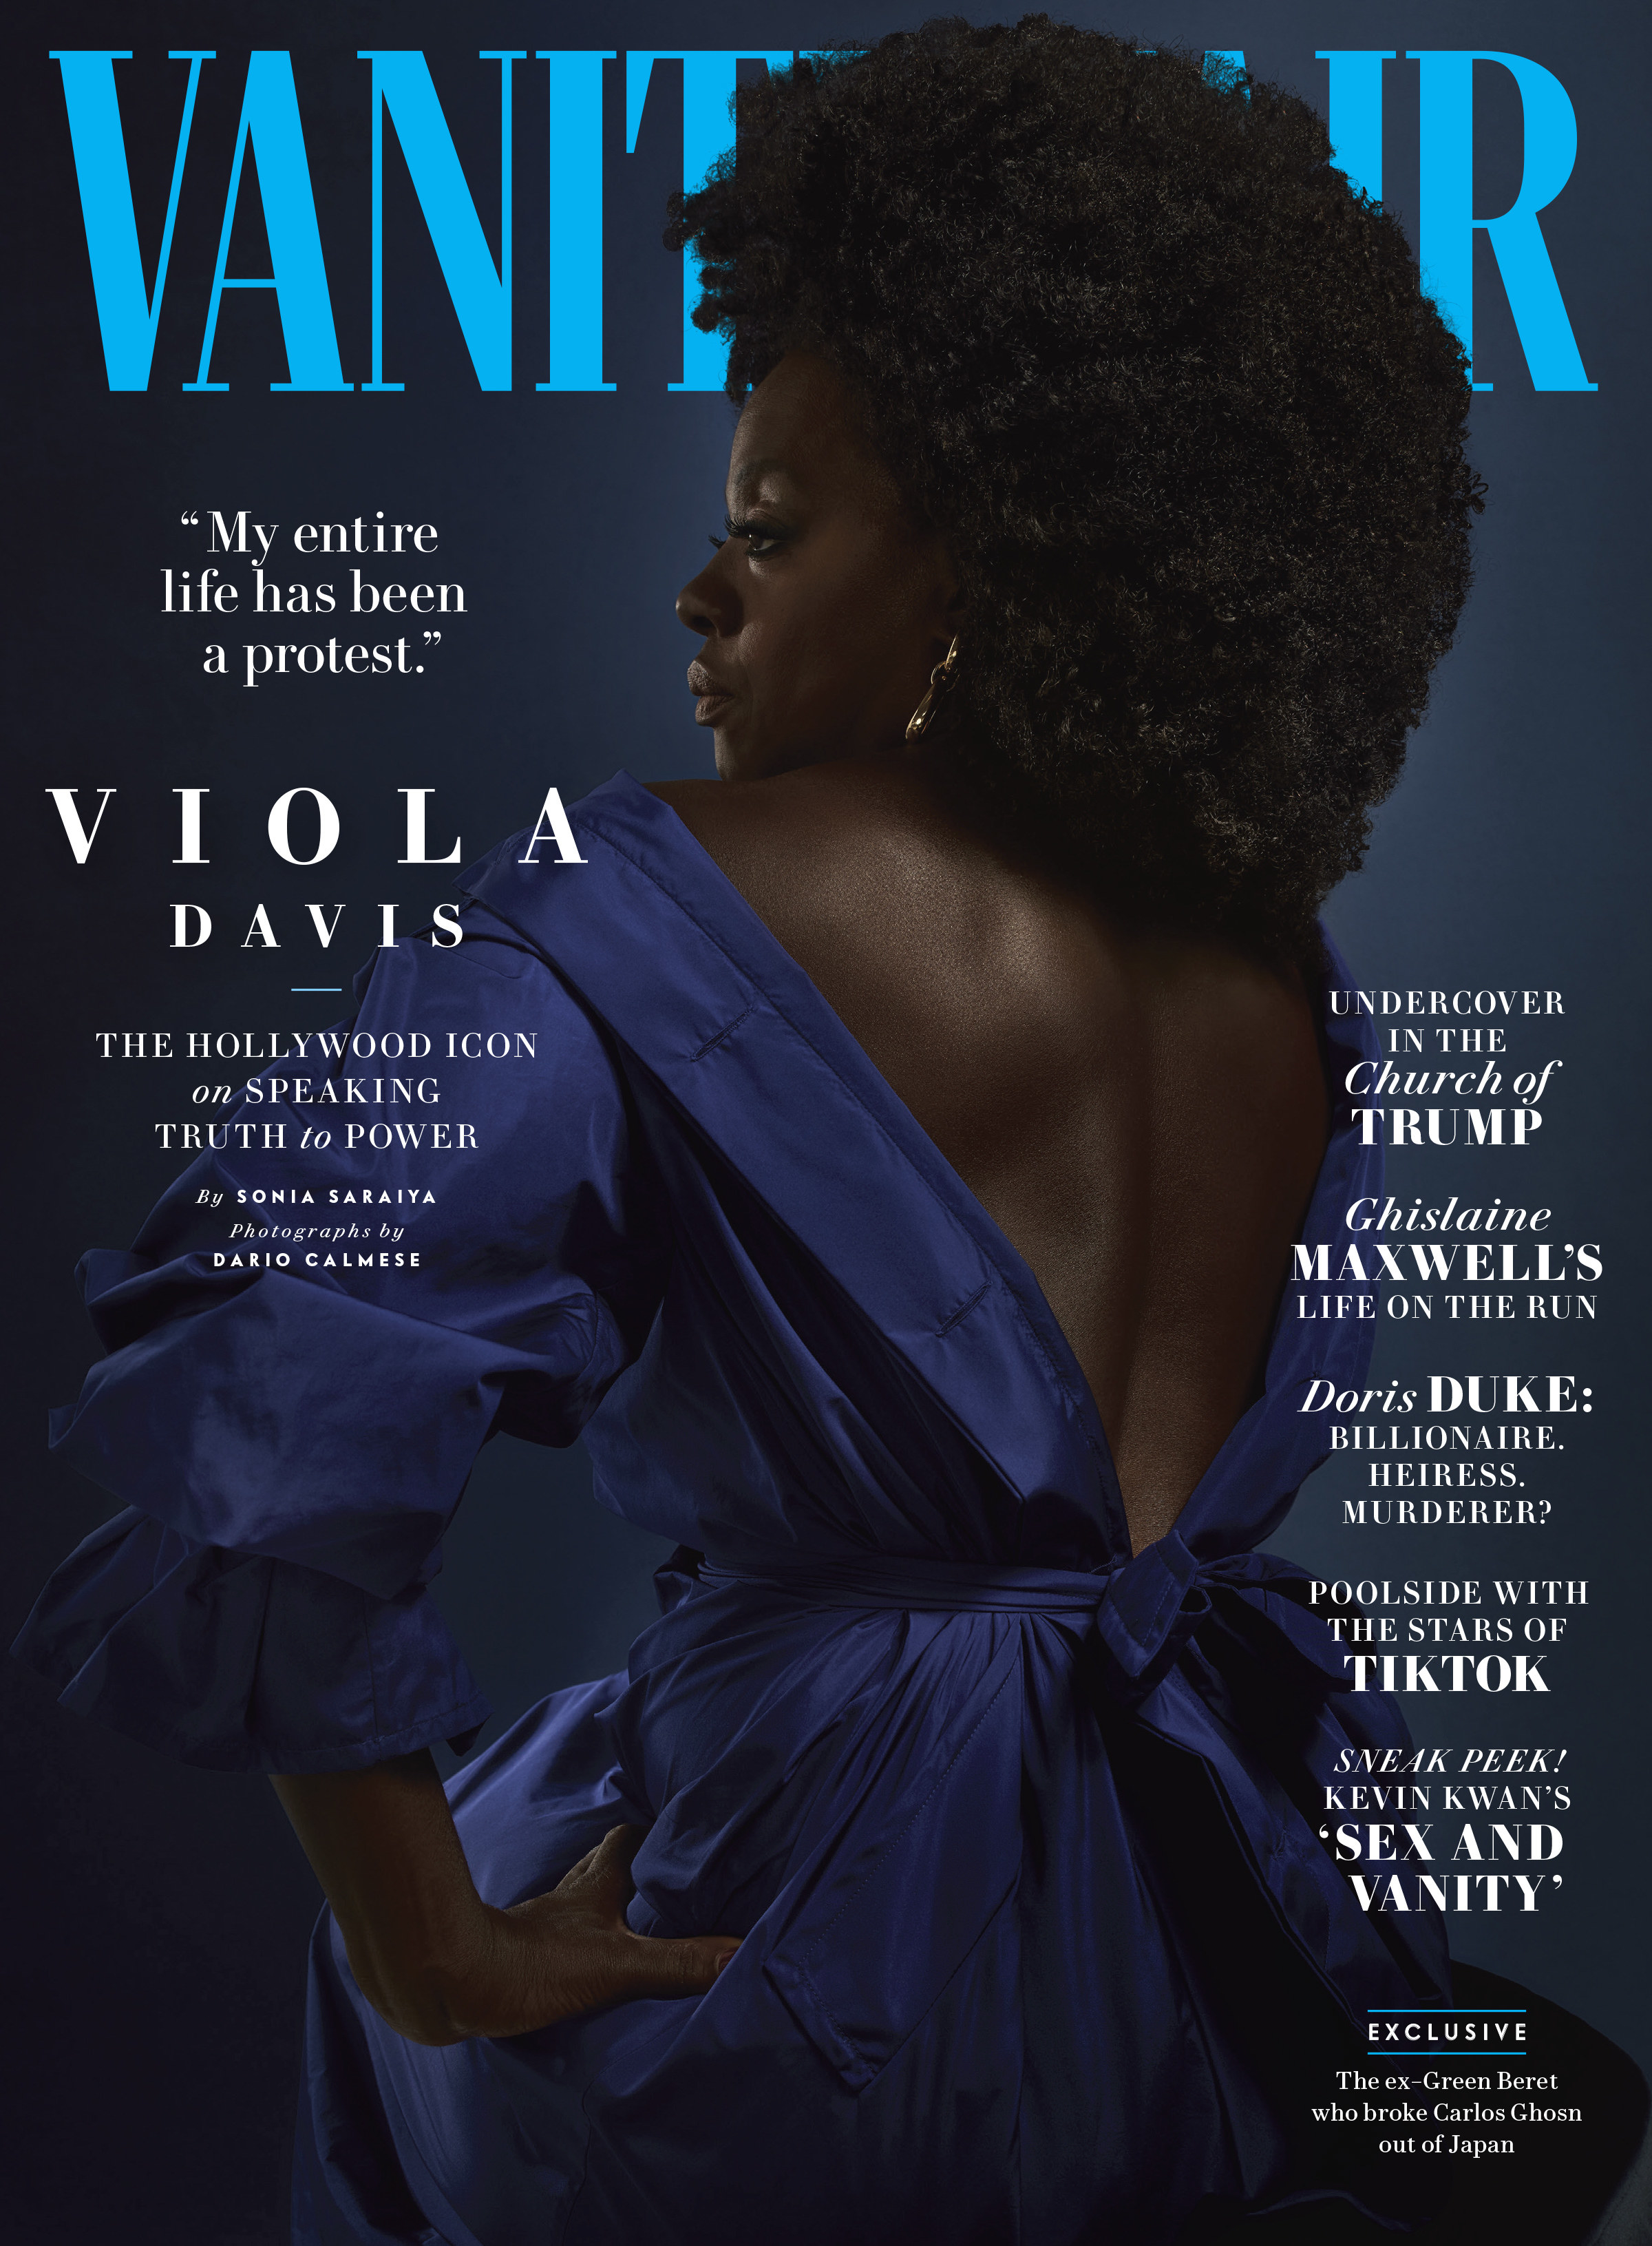 Cover of July/August 2020 issue of Vanity Fair with Viola Davis